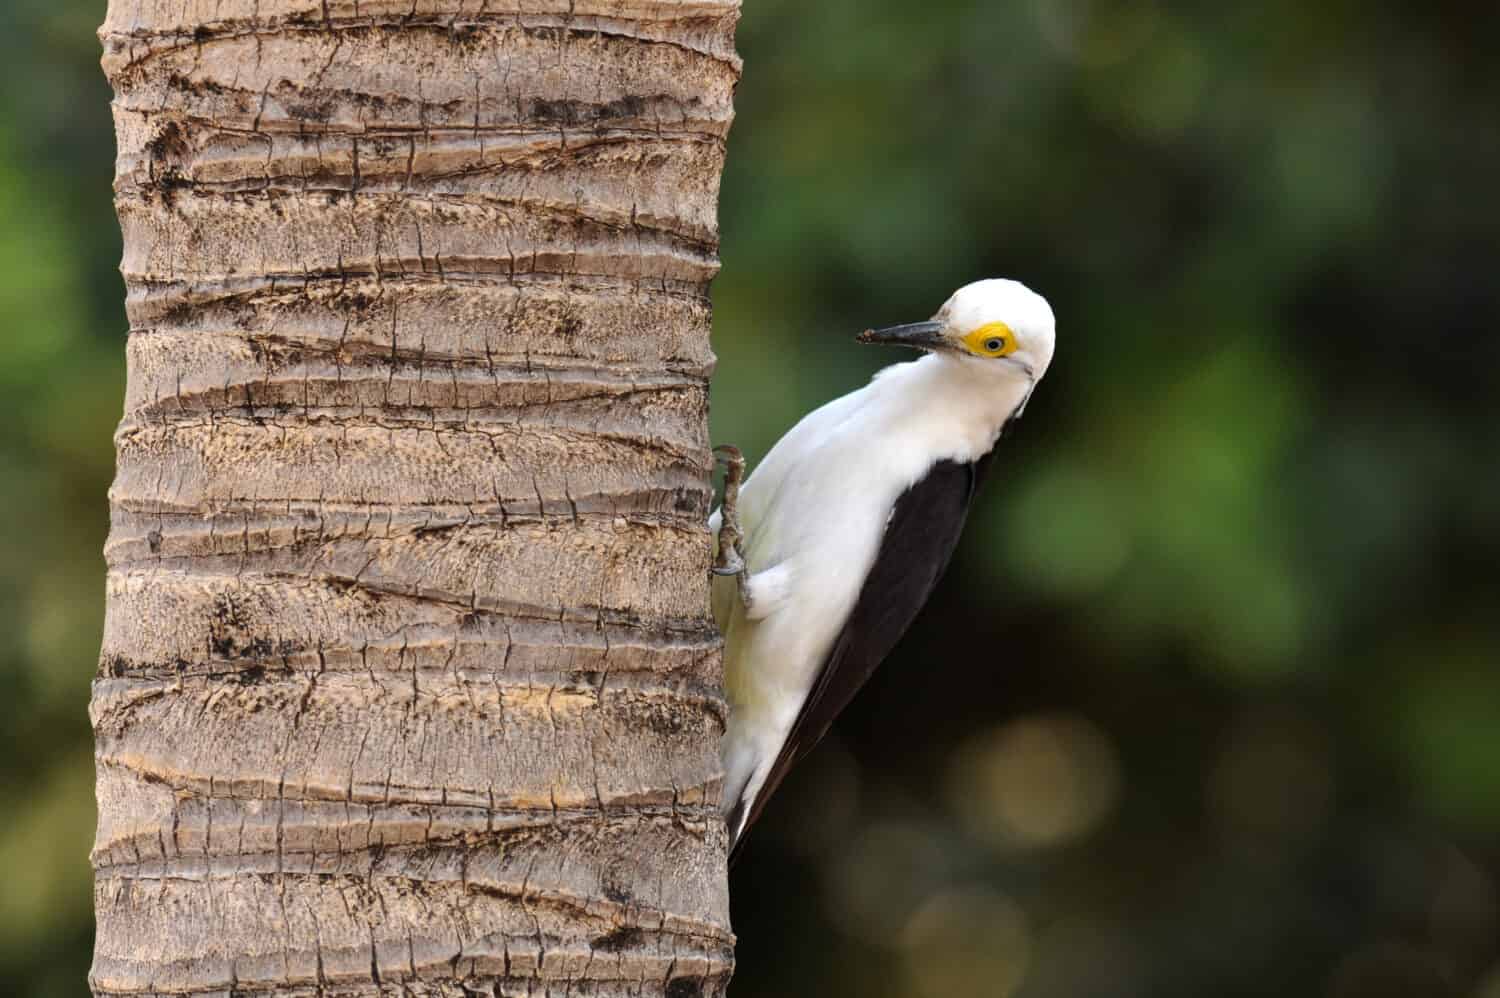 White Woodpecker clinging to bark of a tree in the Pantanal in Brazil.